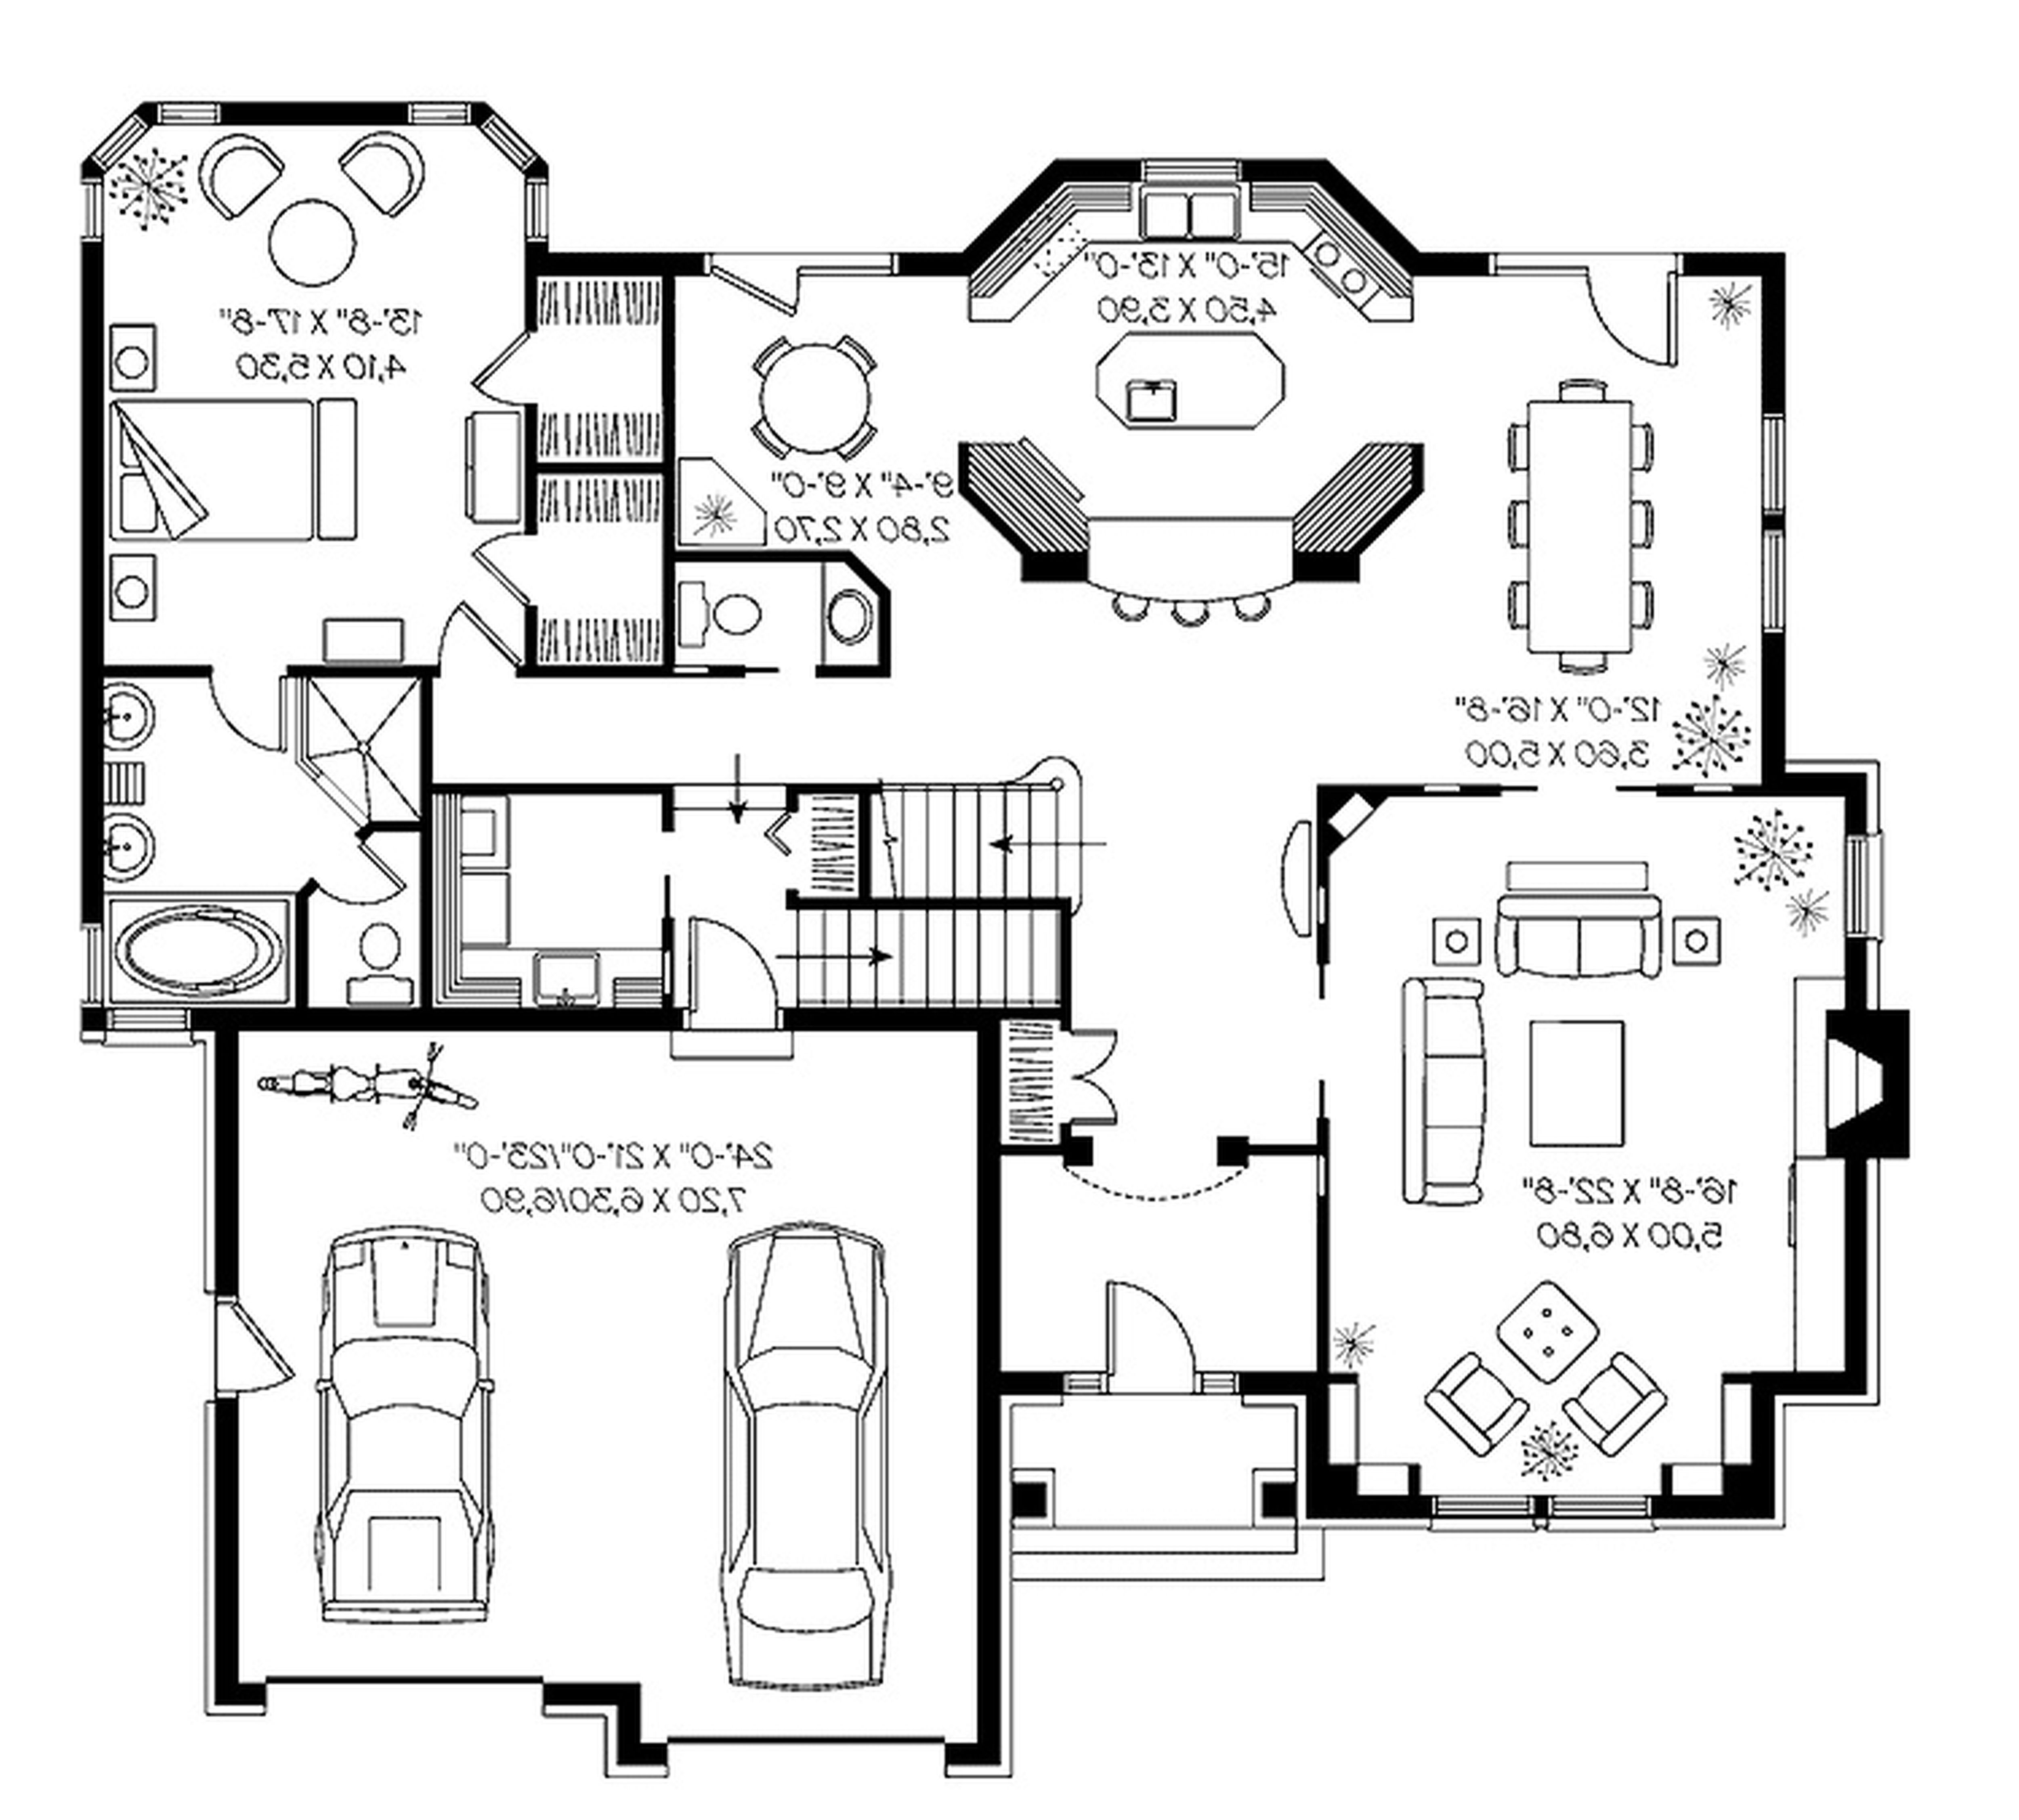 Popular Architecture design for home architectural house plans and designs